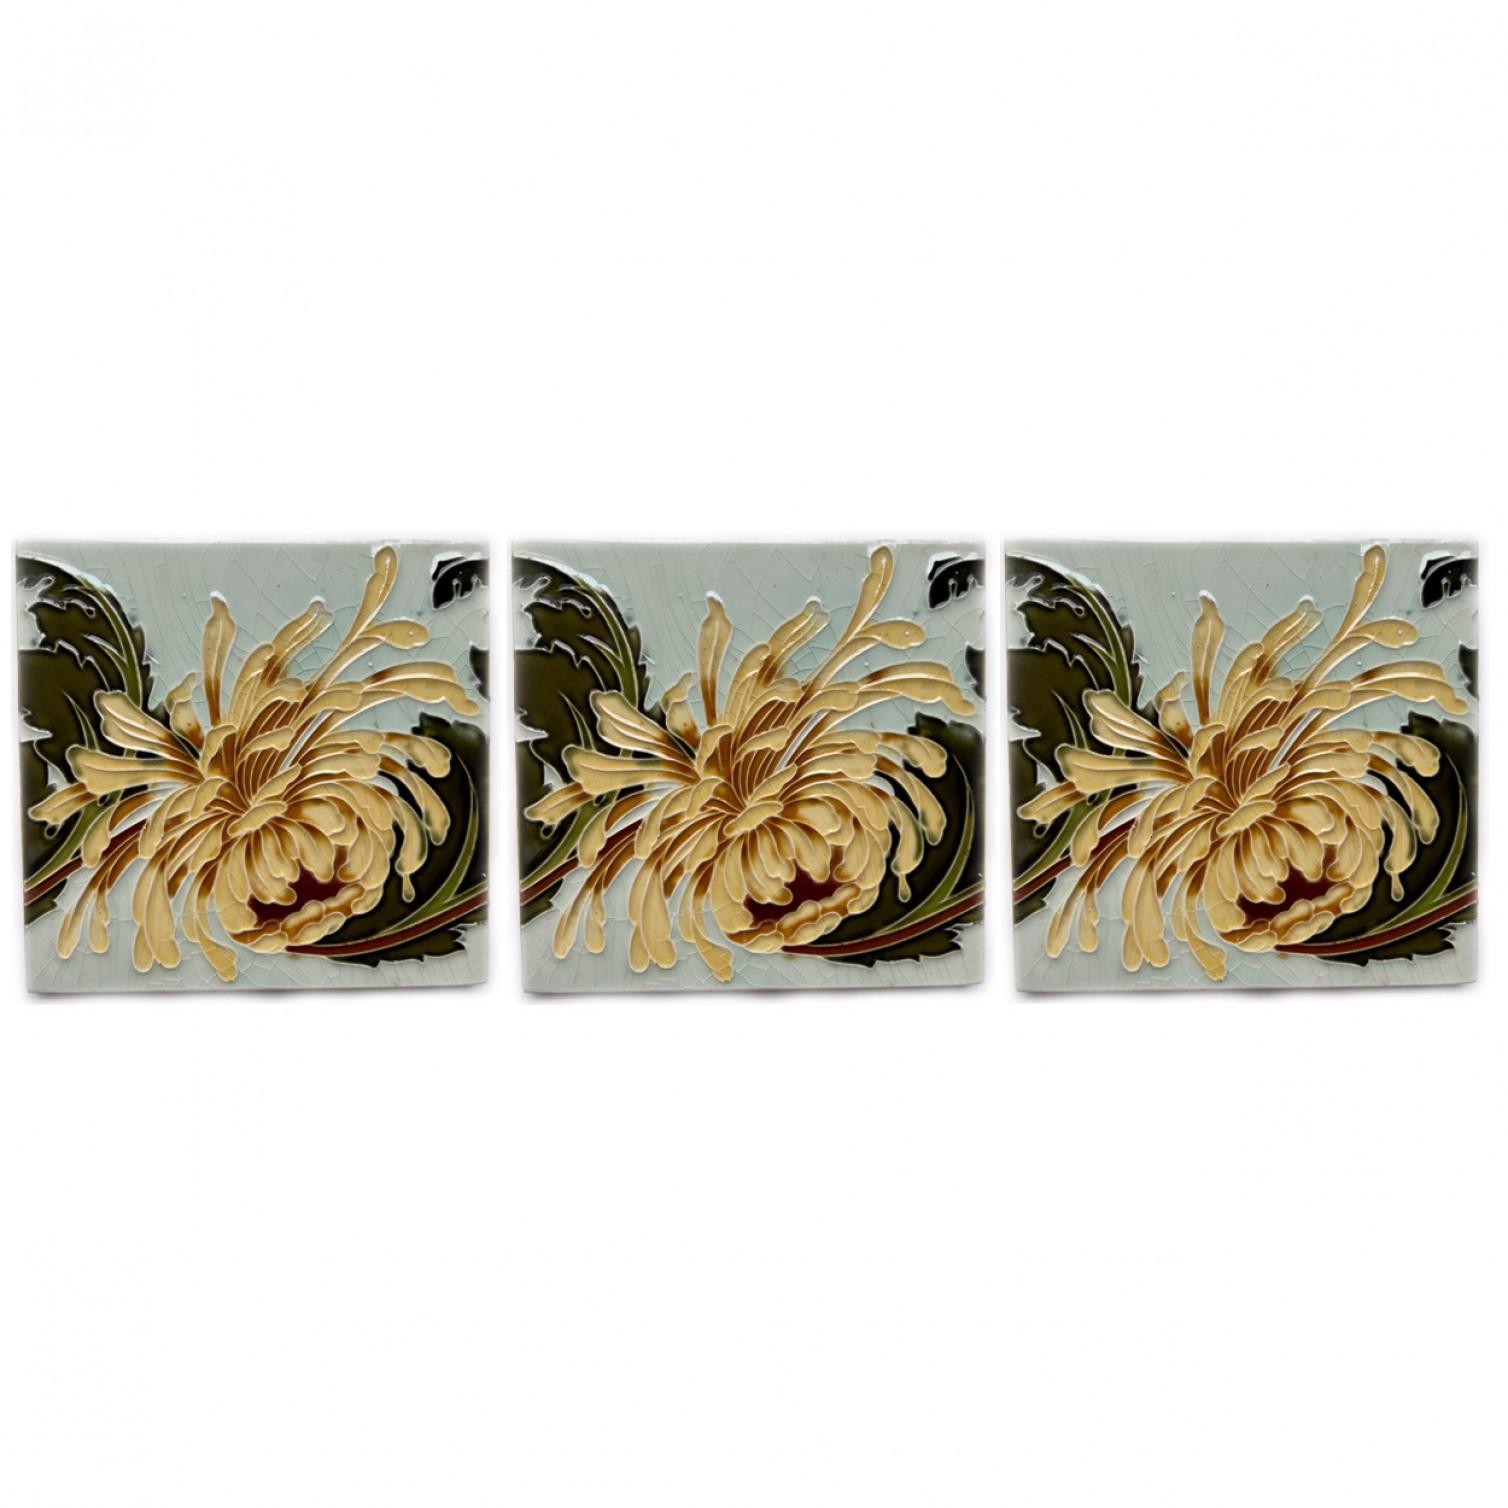 1 of the 60 Art Nouveau ceramic tiles by Gilliot Fabrieken Hemiksem, Belgium, circa 1930. Beautiful original antique tiles with a chrysanthemum in relief. The tile shows a soft yellow flower on a light background. We have matching decorative borders